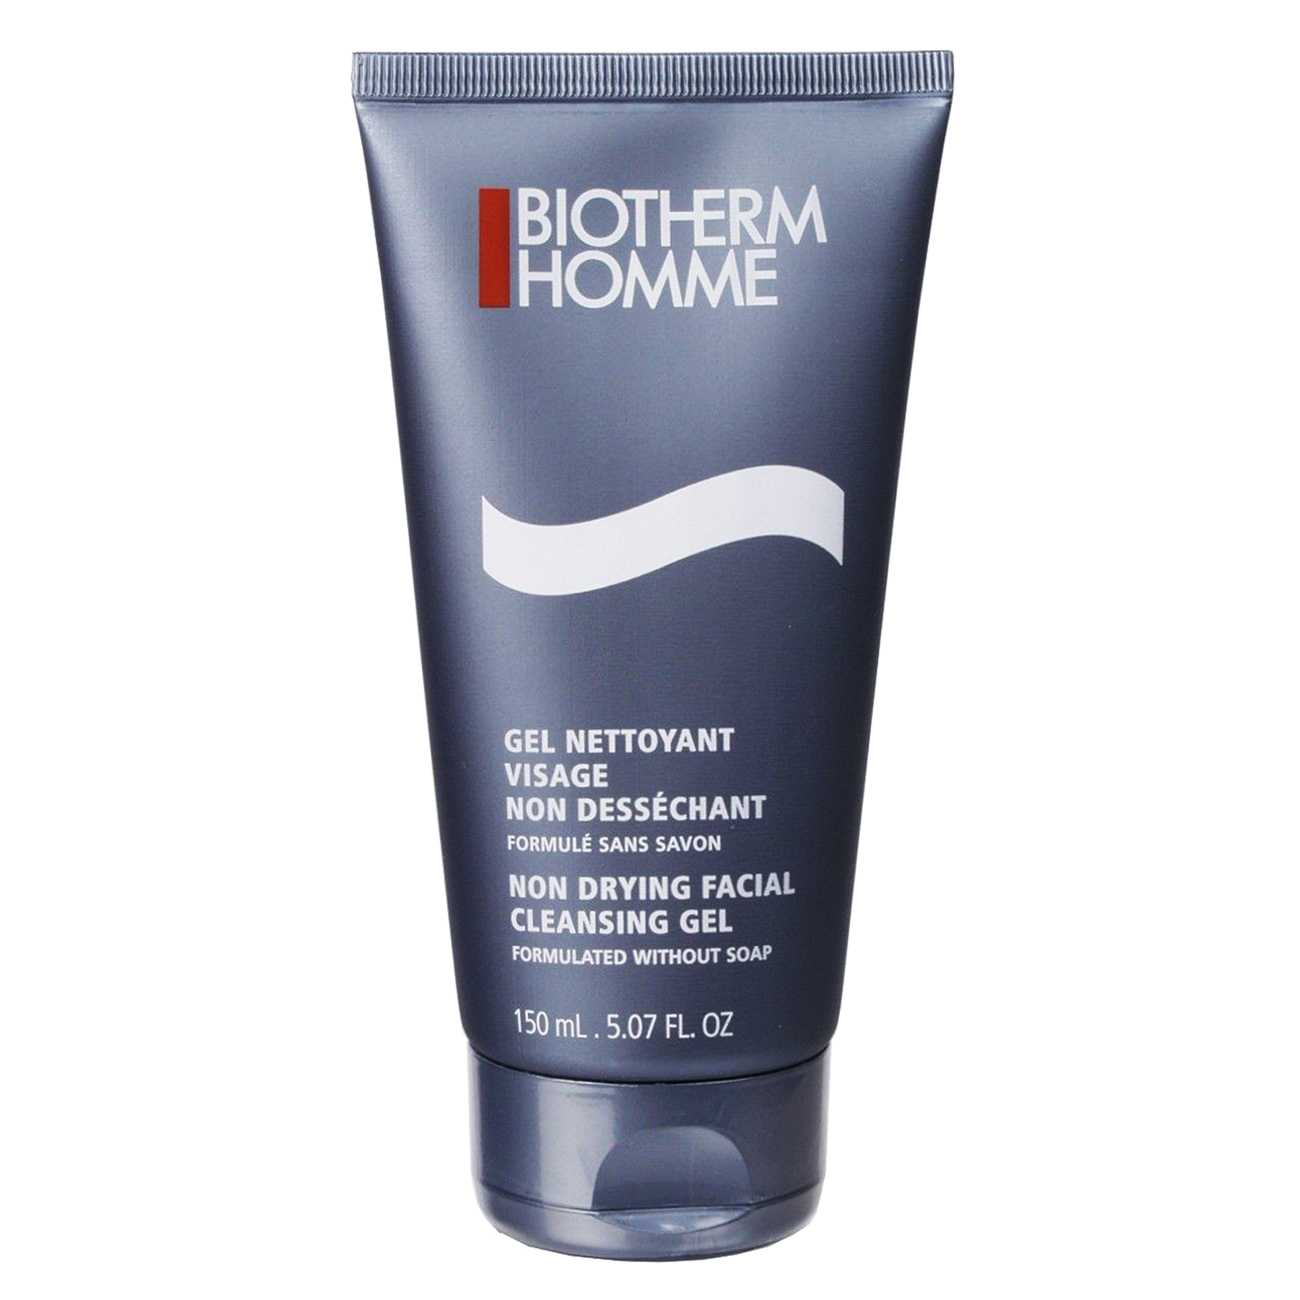 HOMME NON DRYING FACIAL CLEANSING GEL 150 ML original Biotherm bestvalue